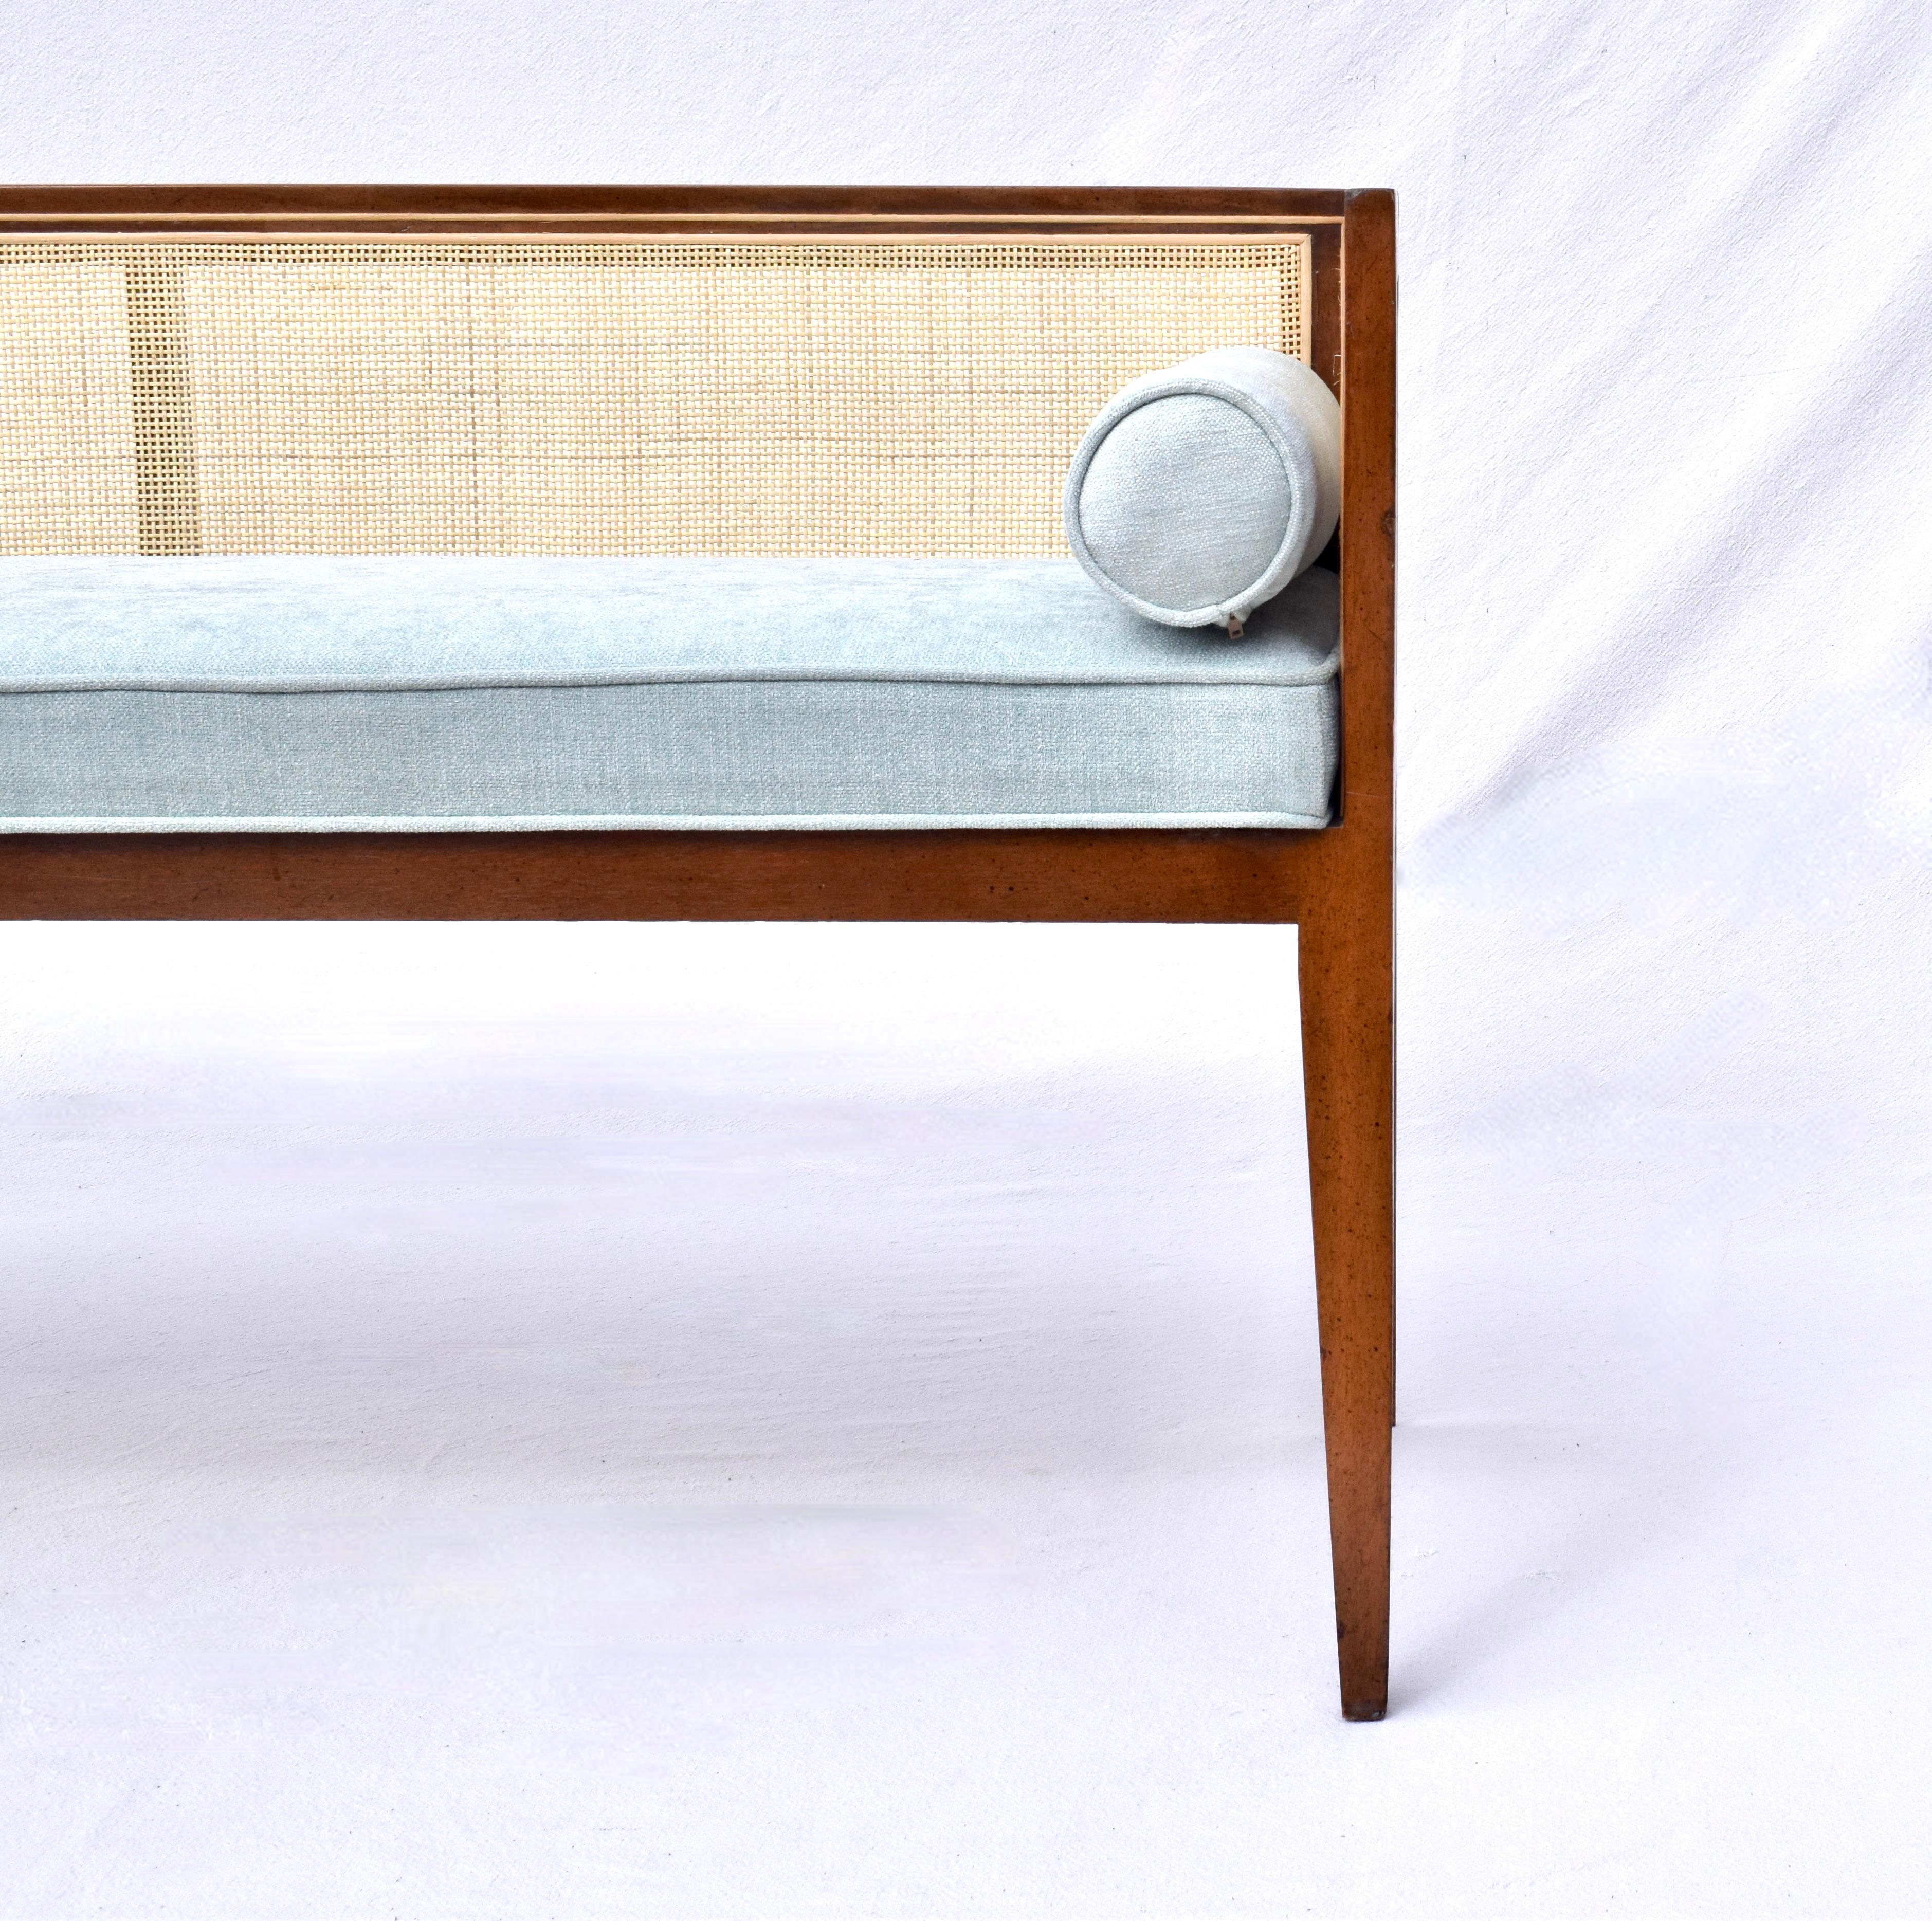 1950s Walnut Window Bench Attributed to Edward Wormley for Dunbar For Sale 5